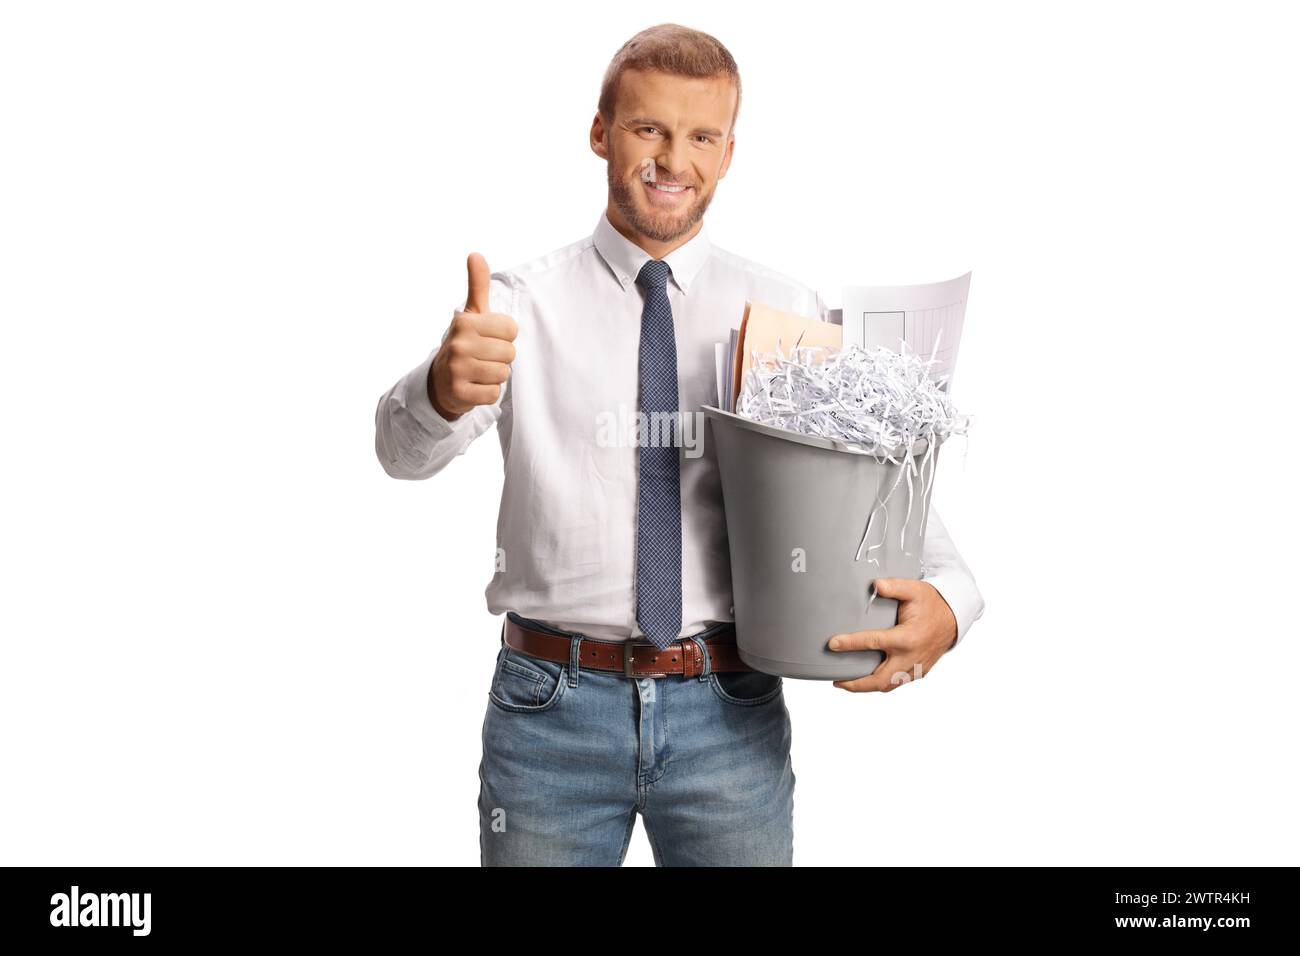 Office worker holding a bin with paper waste and gesturing thumbs up isolated on white background Stock Photo